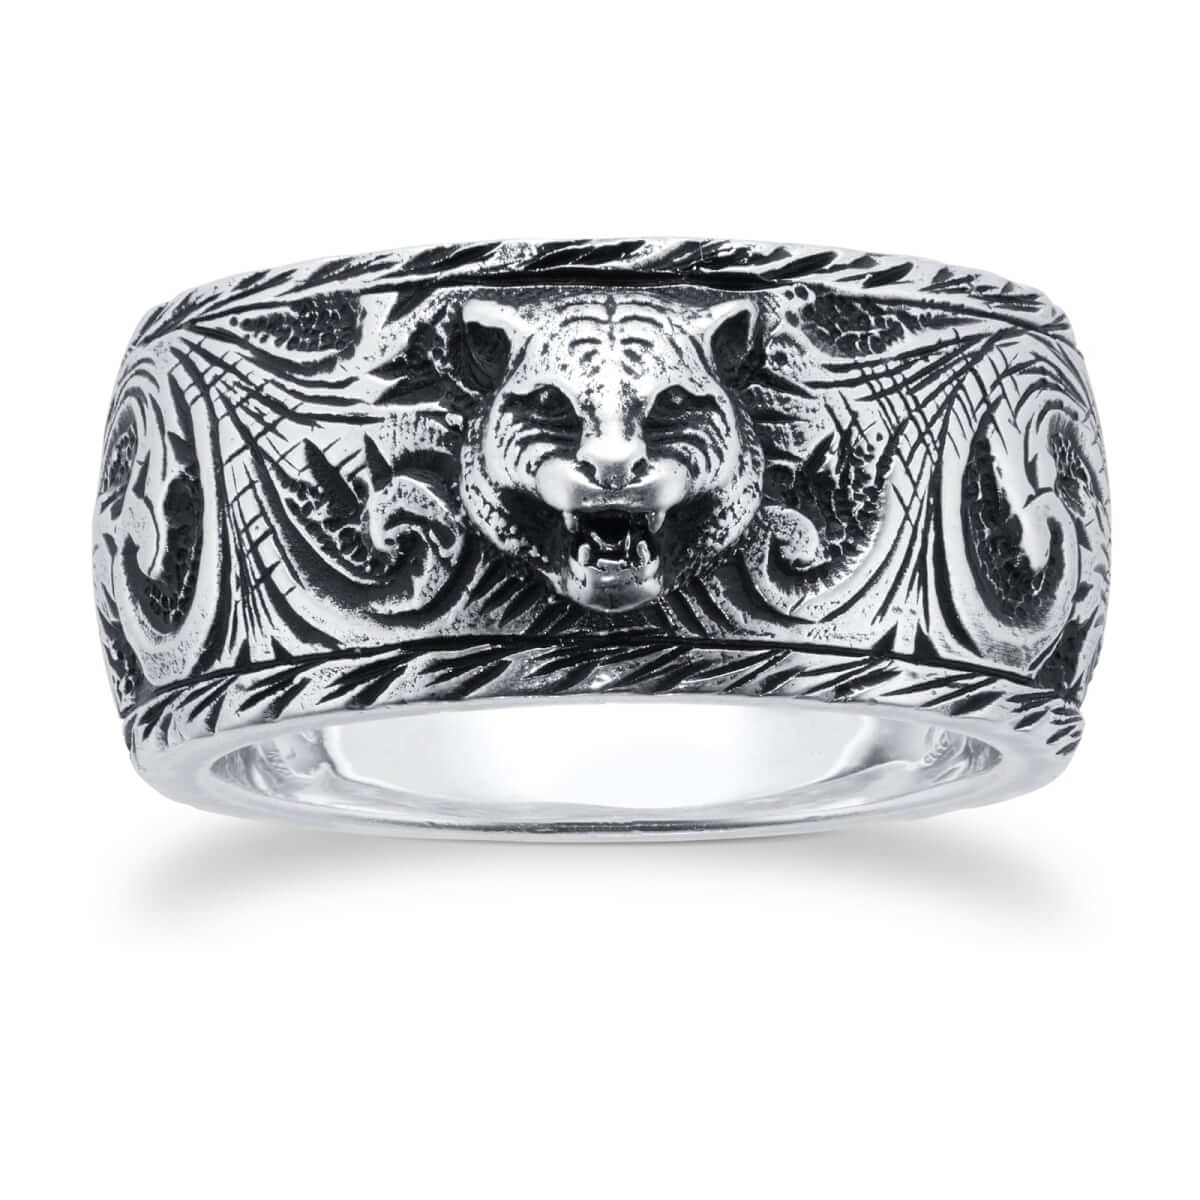 Gatto Thin Silver 10mm Ring With Feline Head - Ring Size O